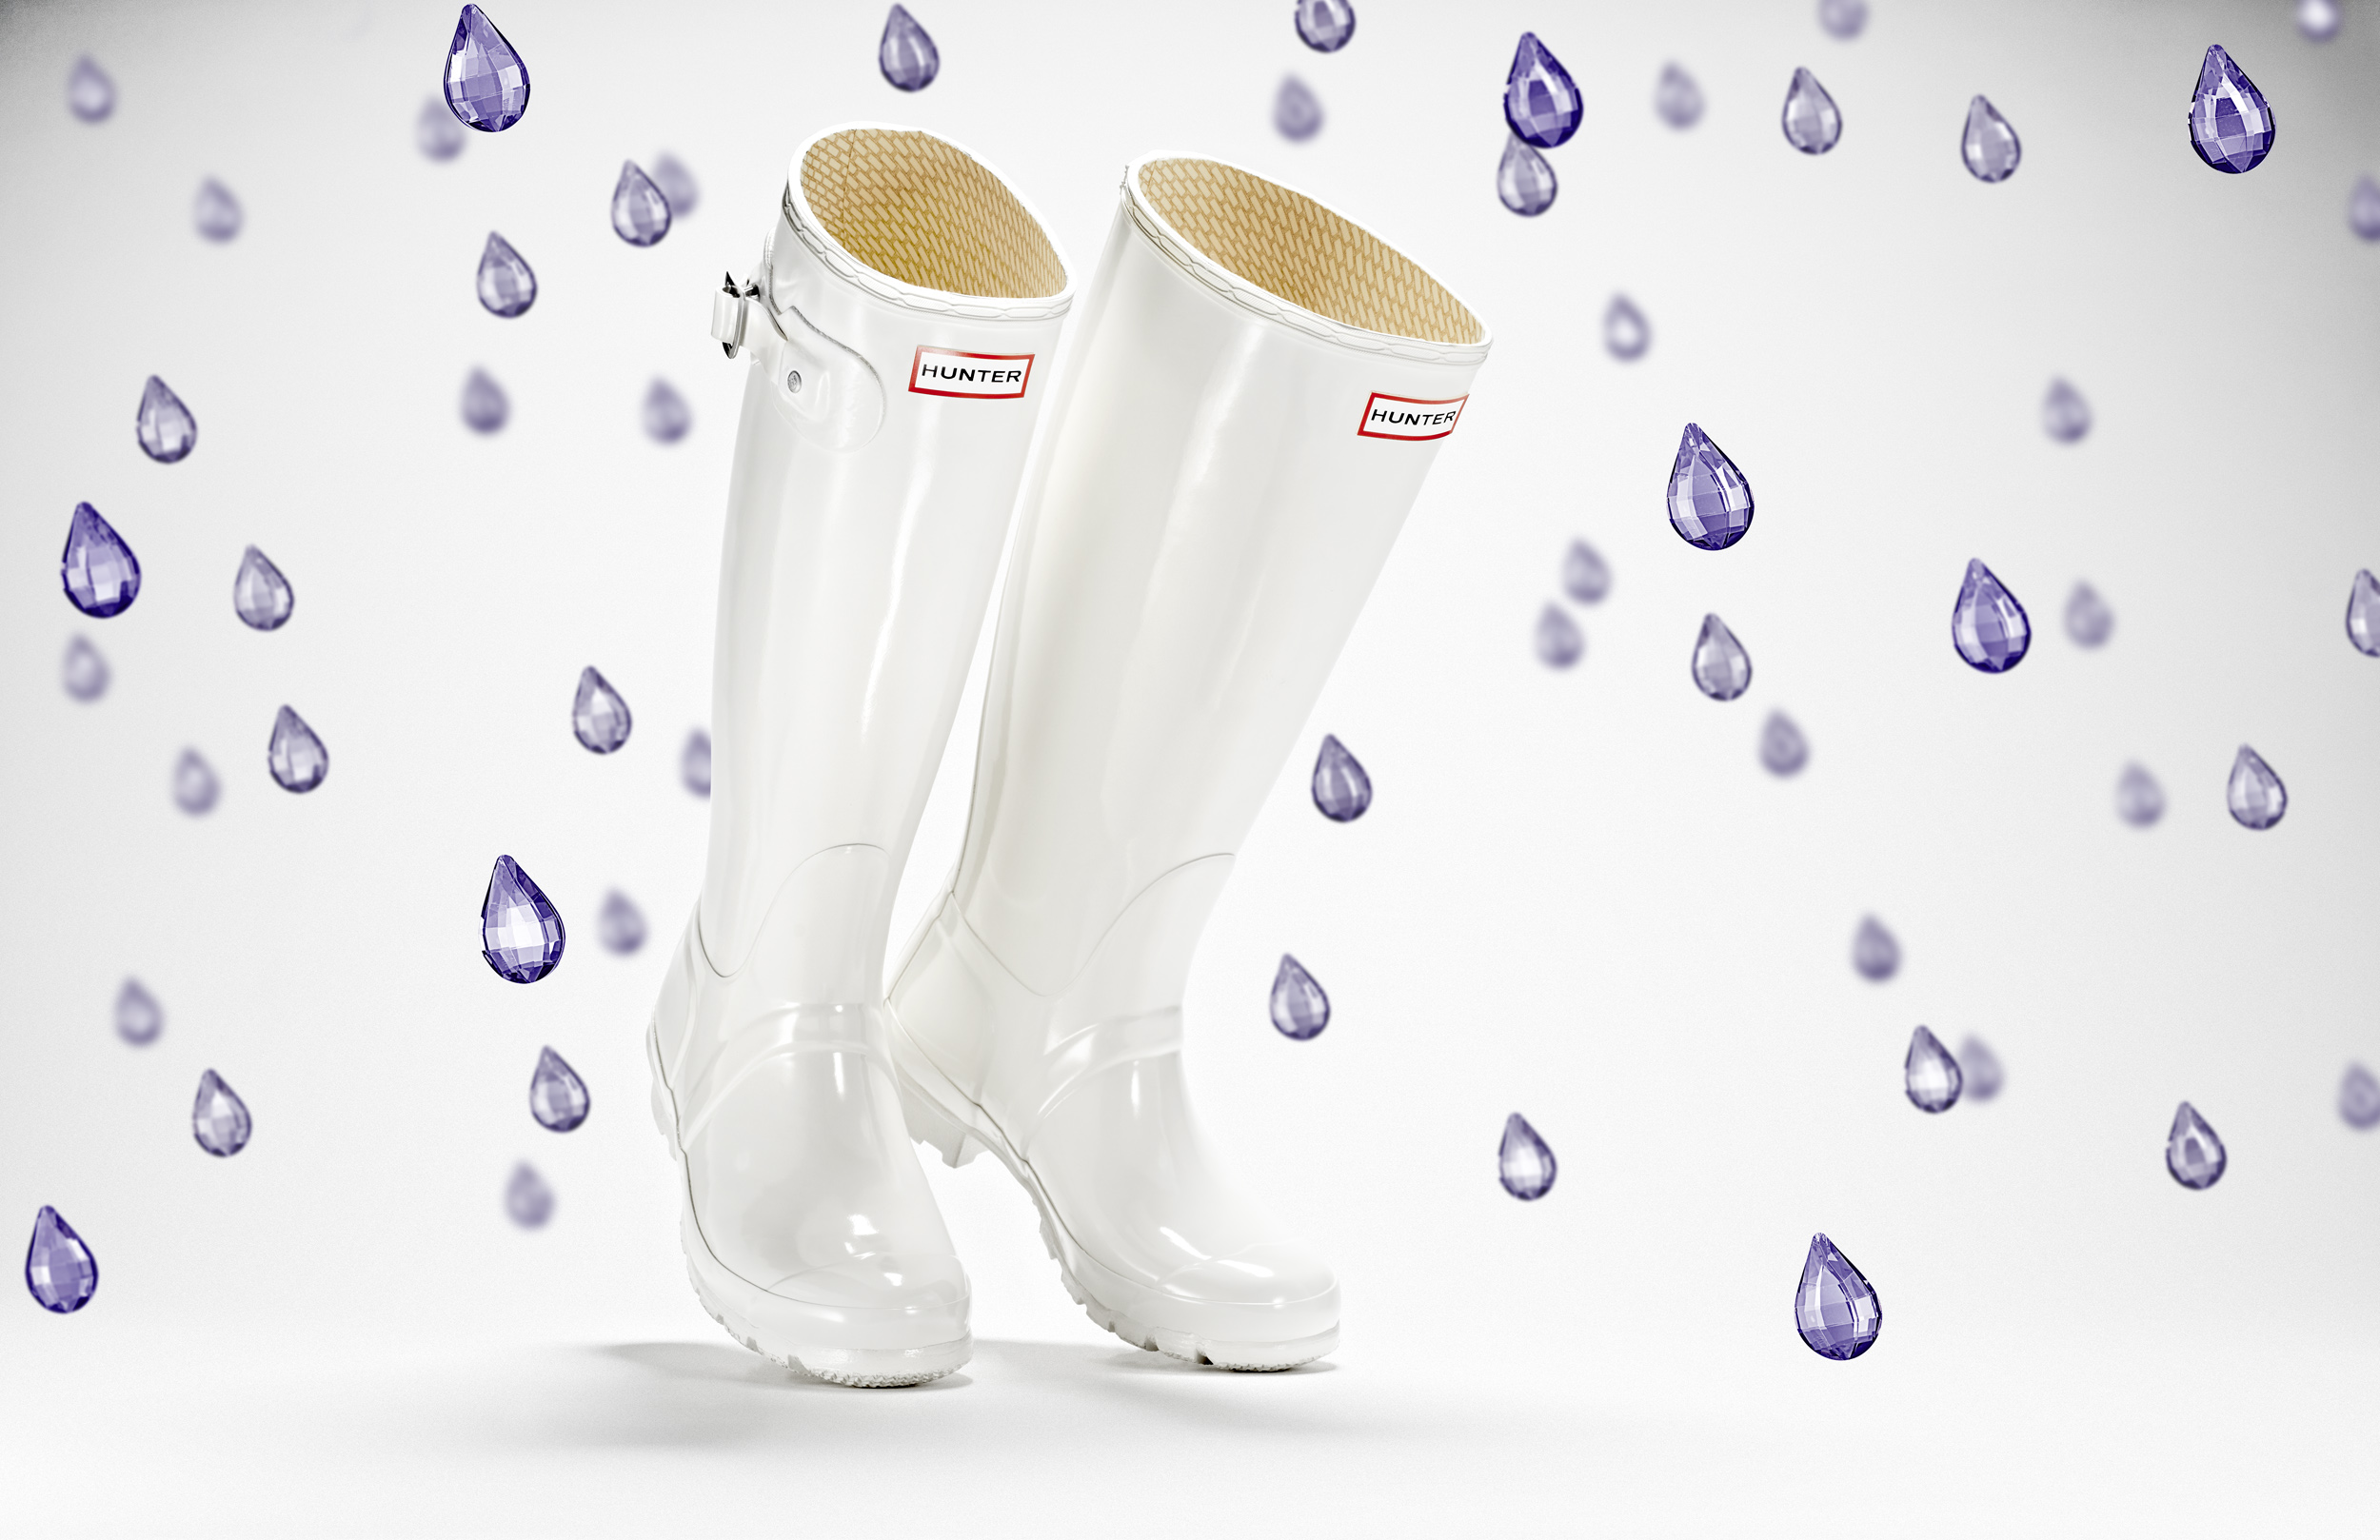 advertising still life photograph of white hunter boots surrounded by purple jewel raindrops